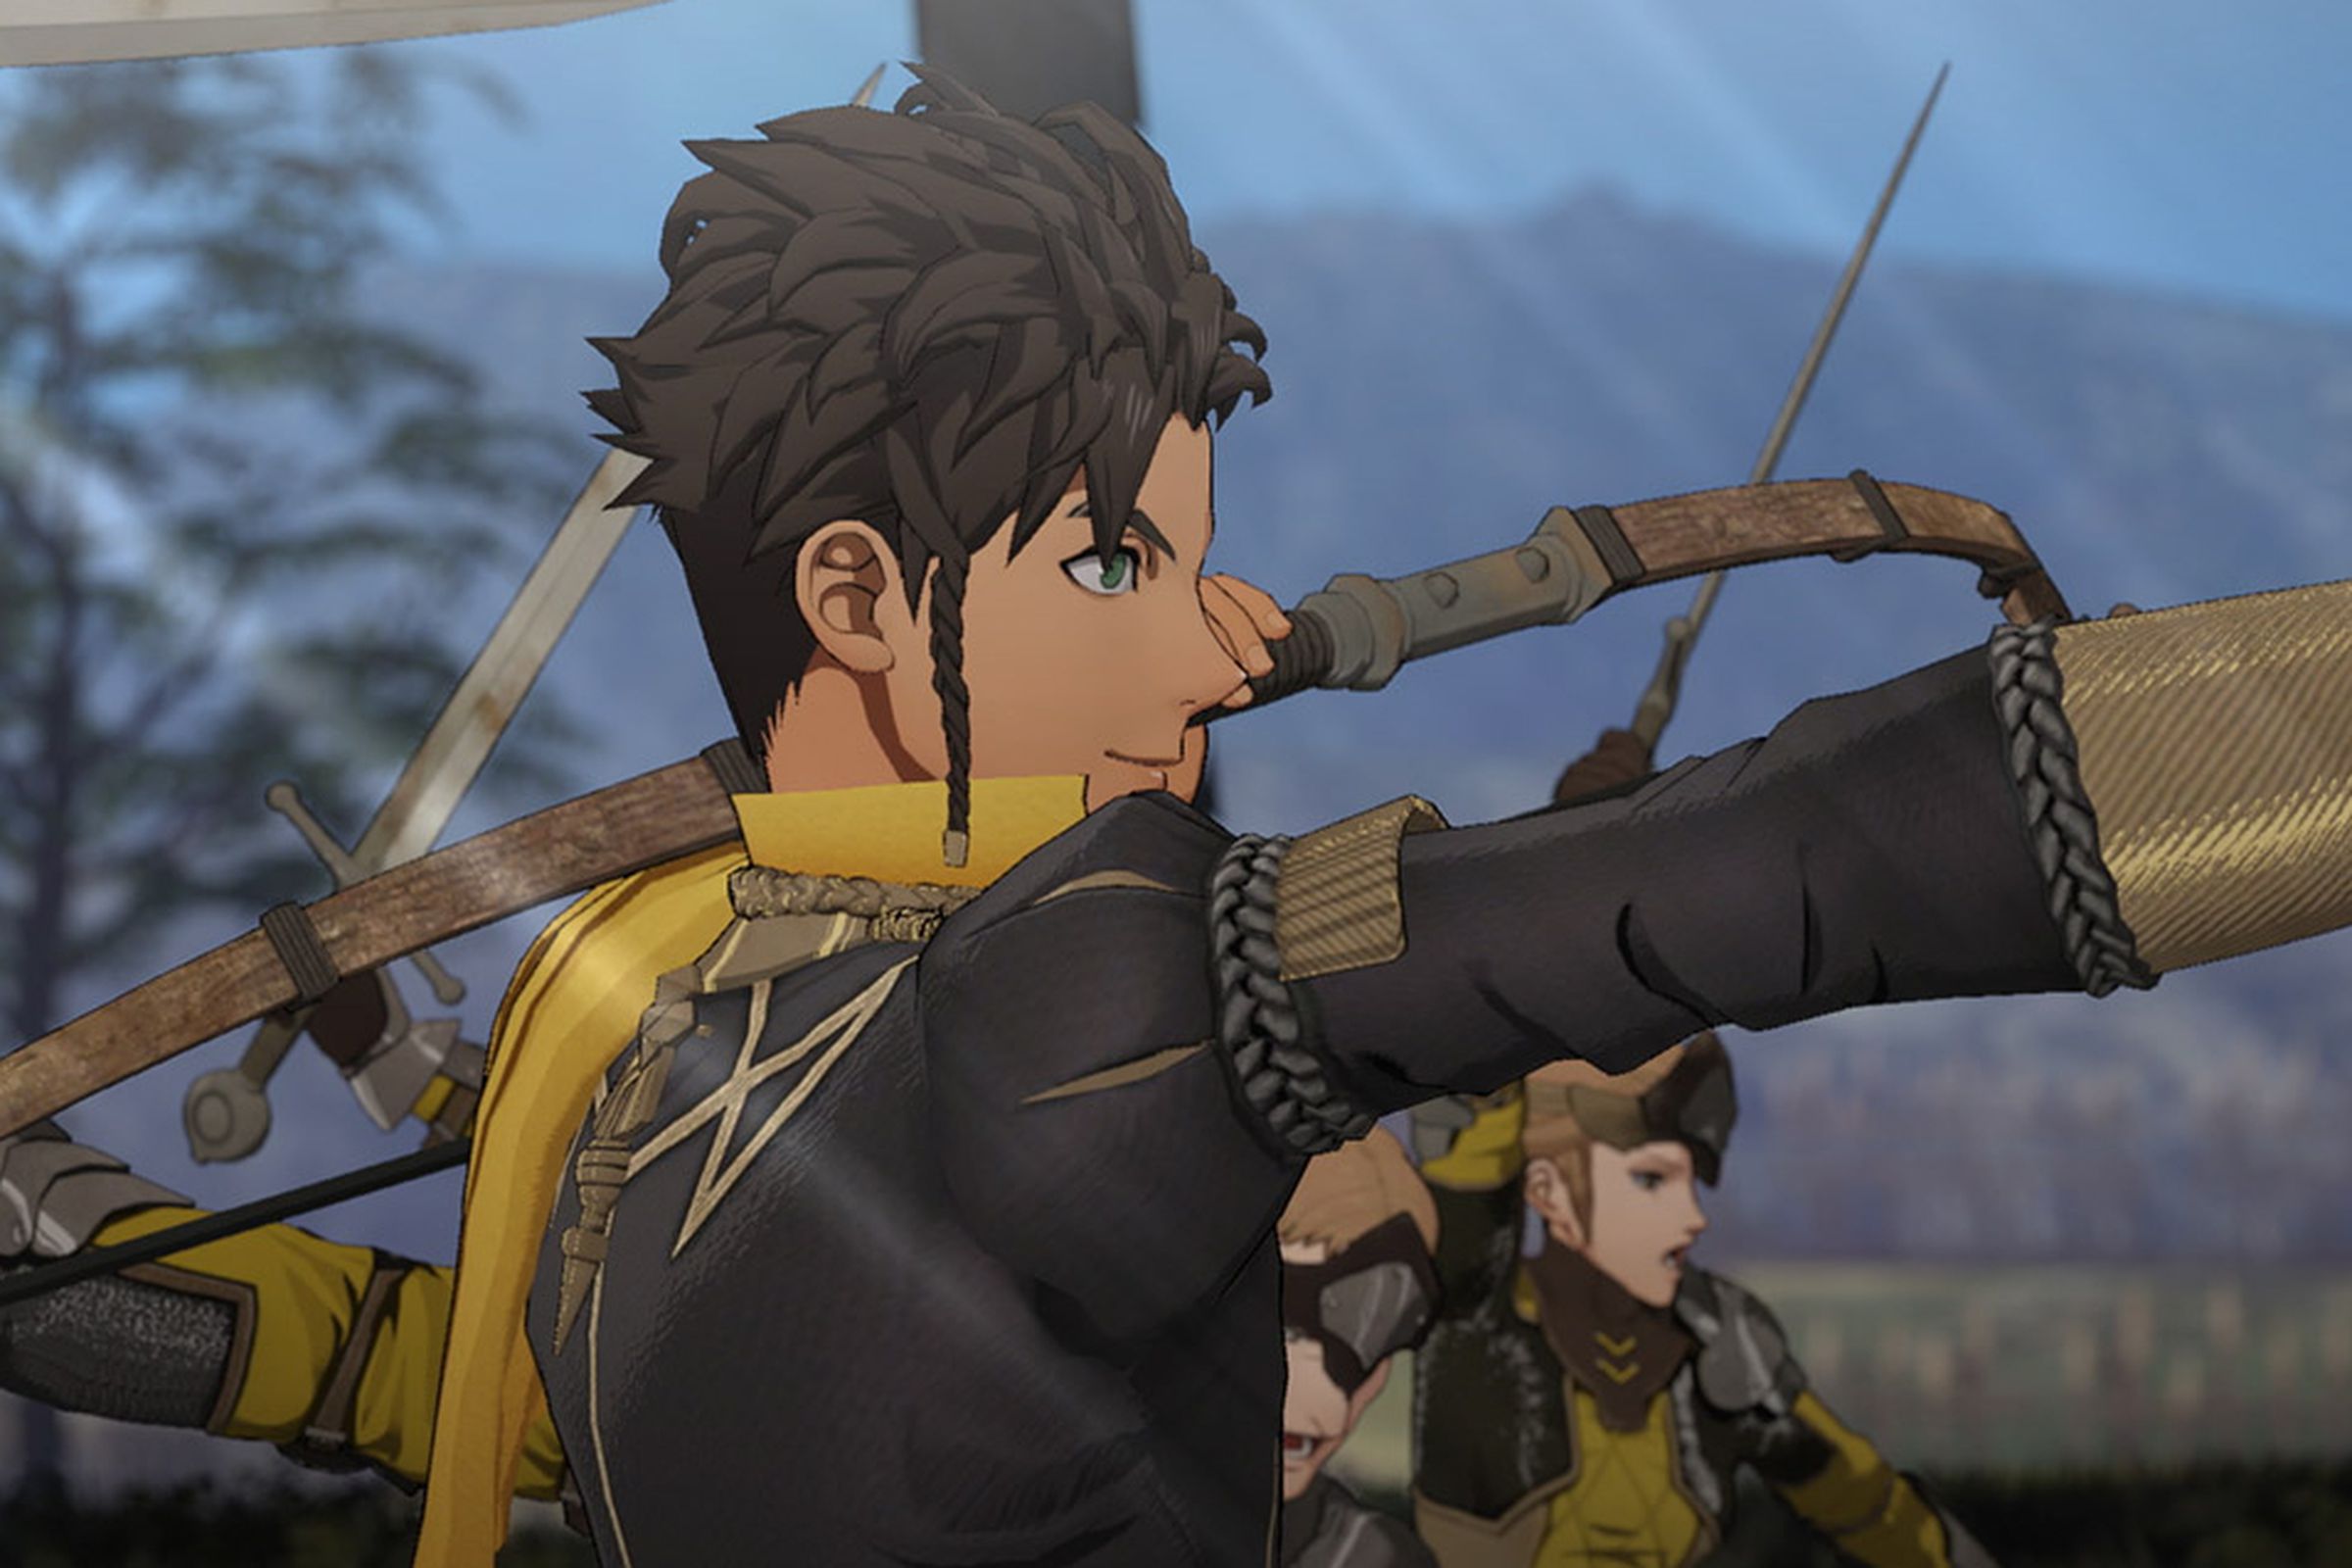 You’ll get to know Claude if you select the Golden Deer house in Fire Emblem: Three Houses.